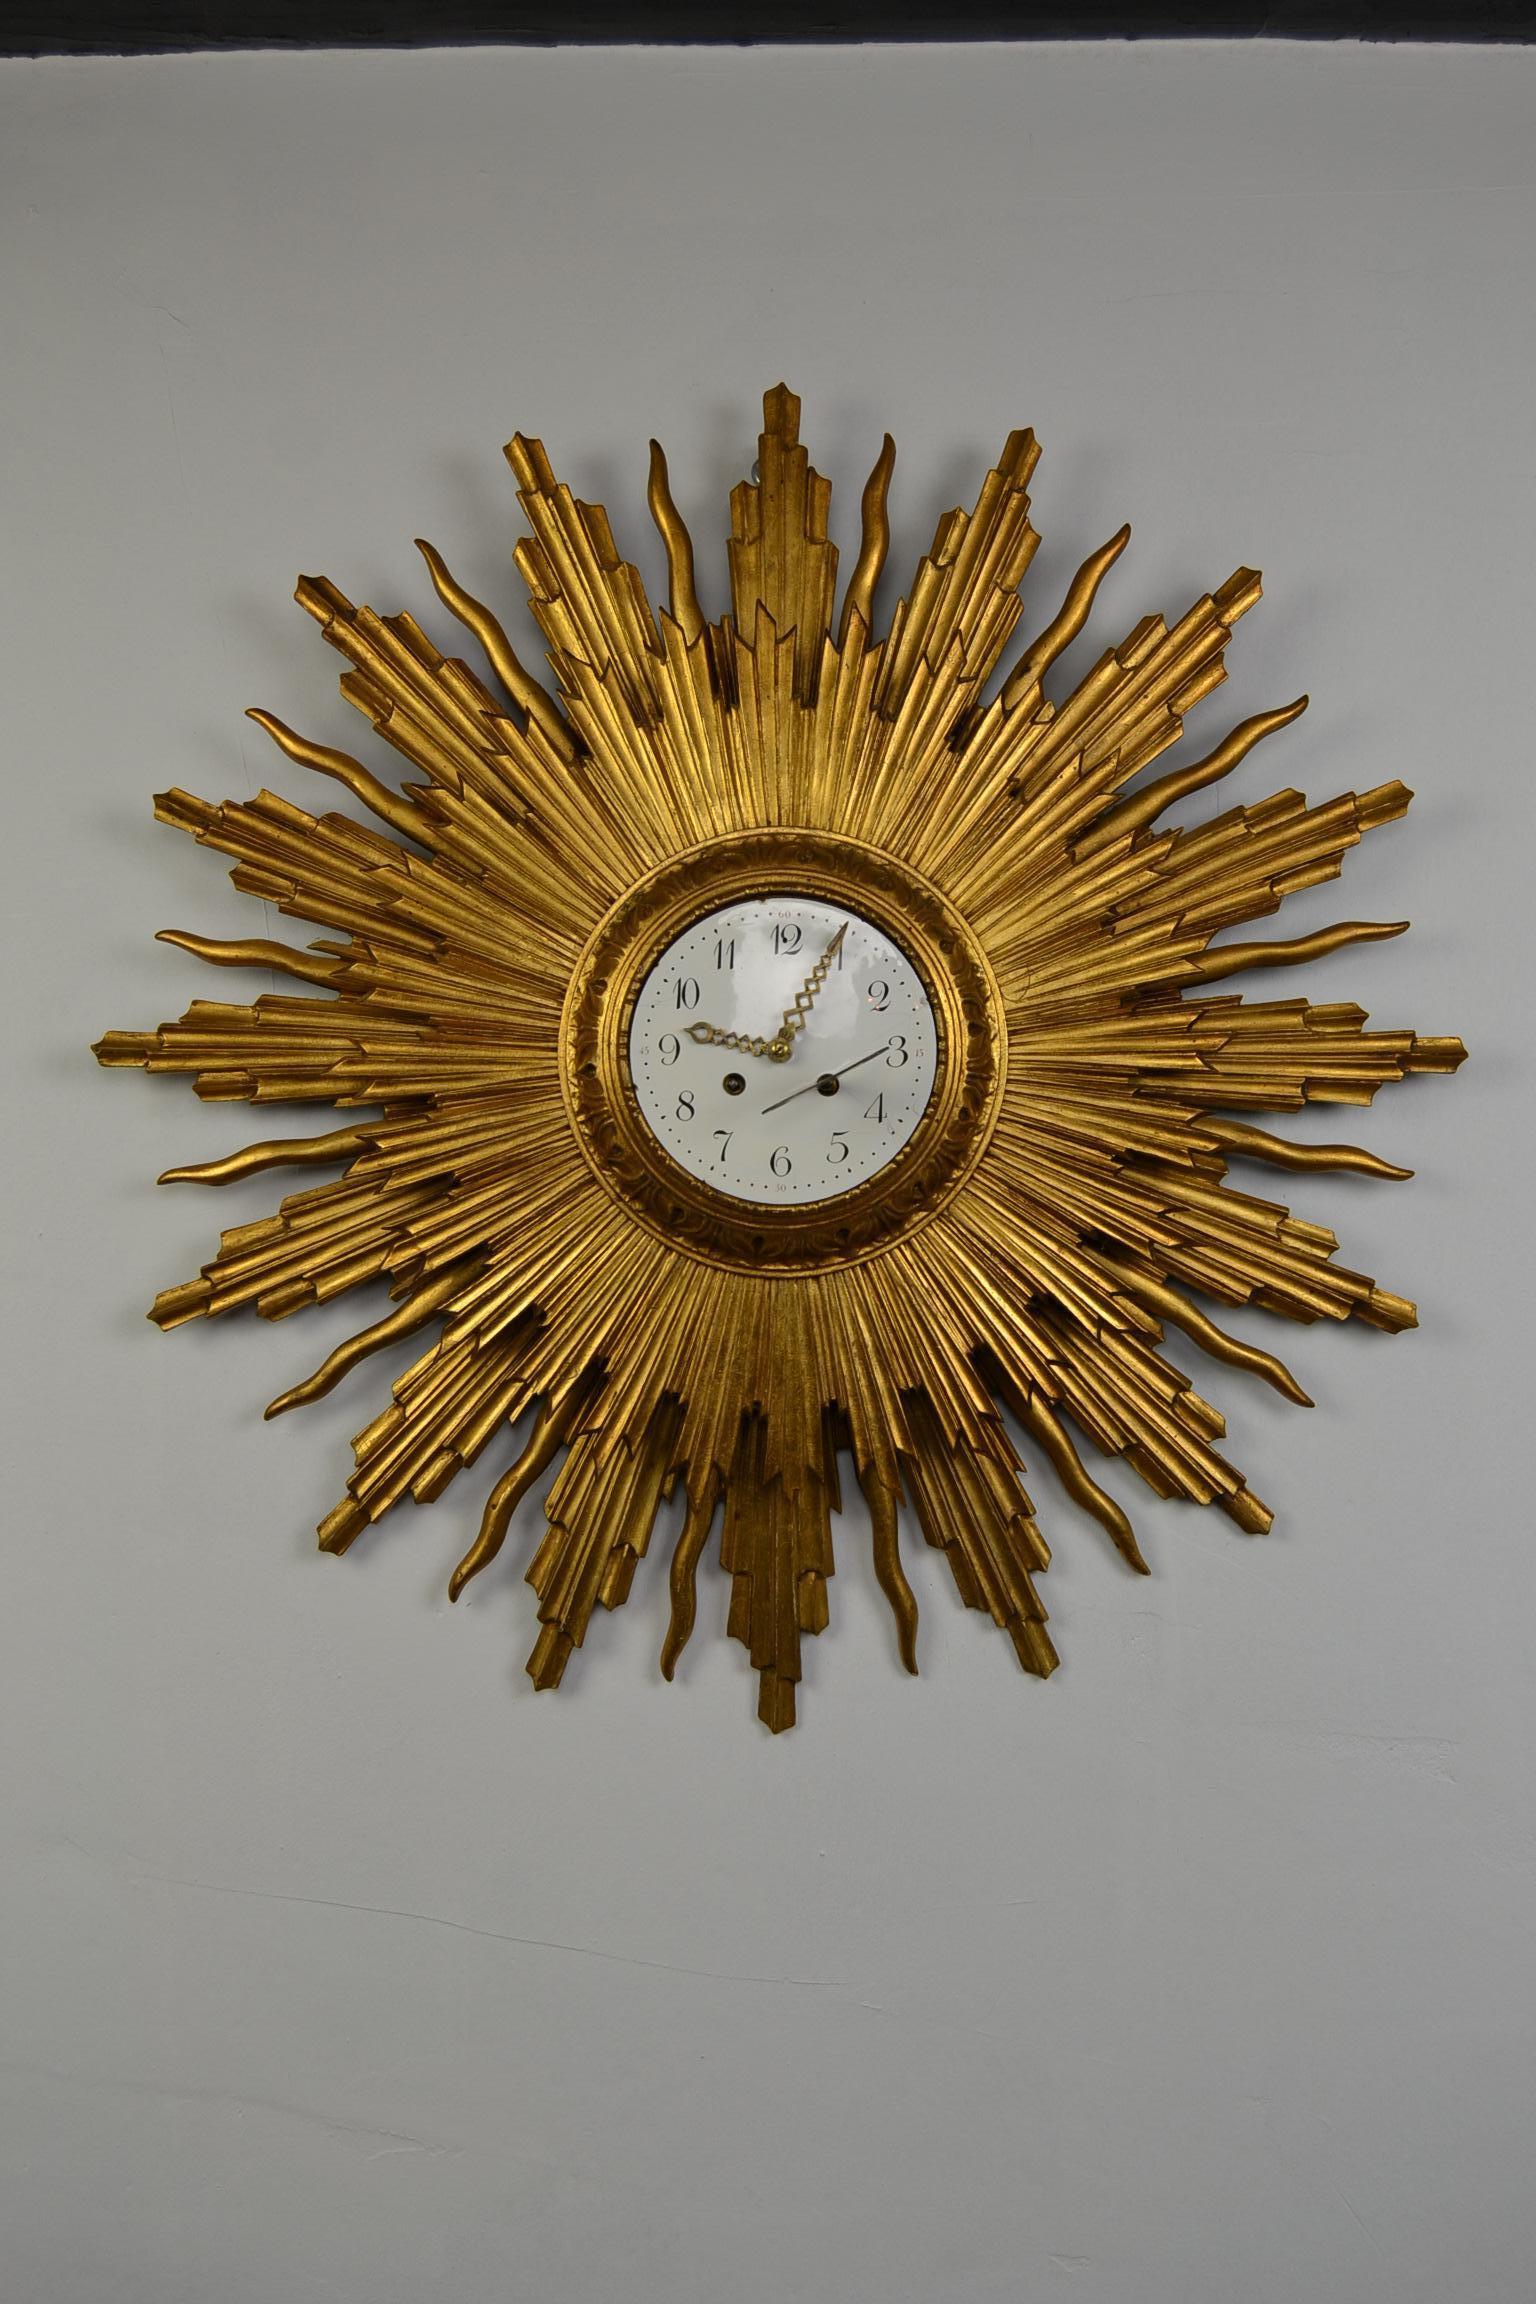 Stunning large sparkling giltwood sunburst clock.
Diameter: 30,32 inch - 77 cm !! 

This vintage sunburst clock from the 1950s is made of a gilt wooden frame, consisting of two layers. 
It has an enamel or porcelain dial, copper pointers and a